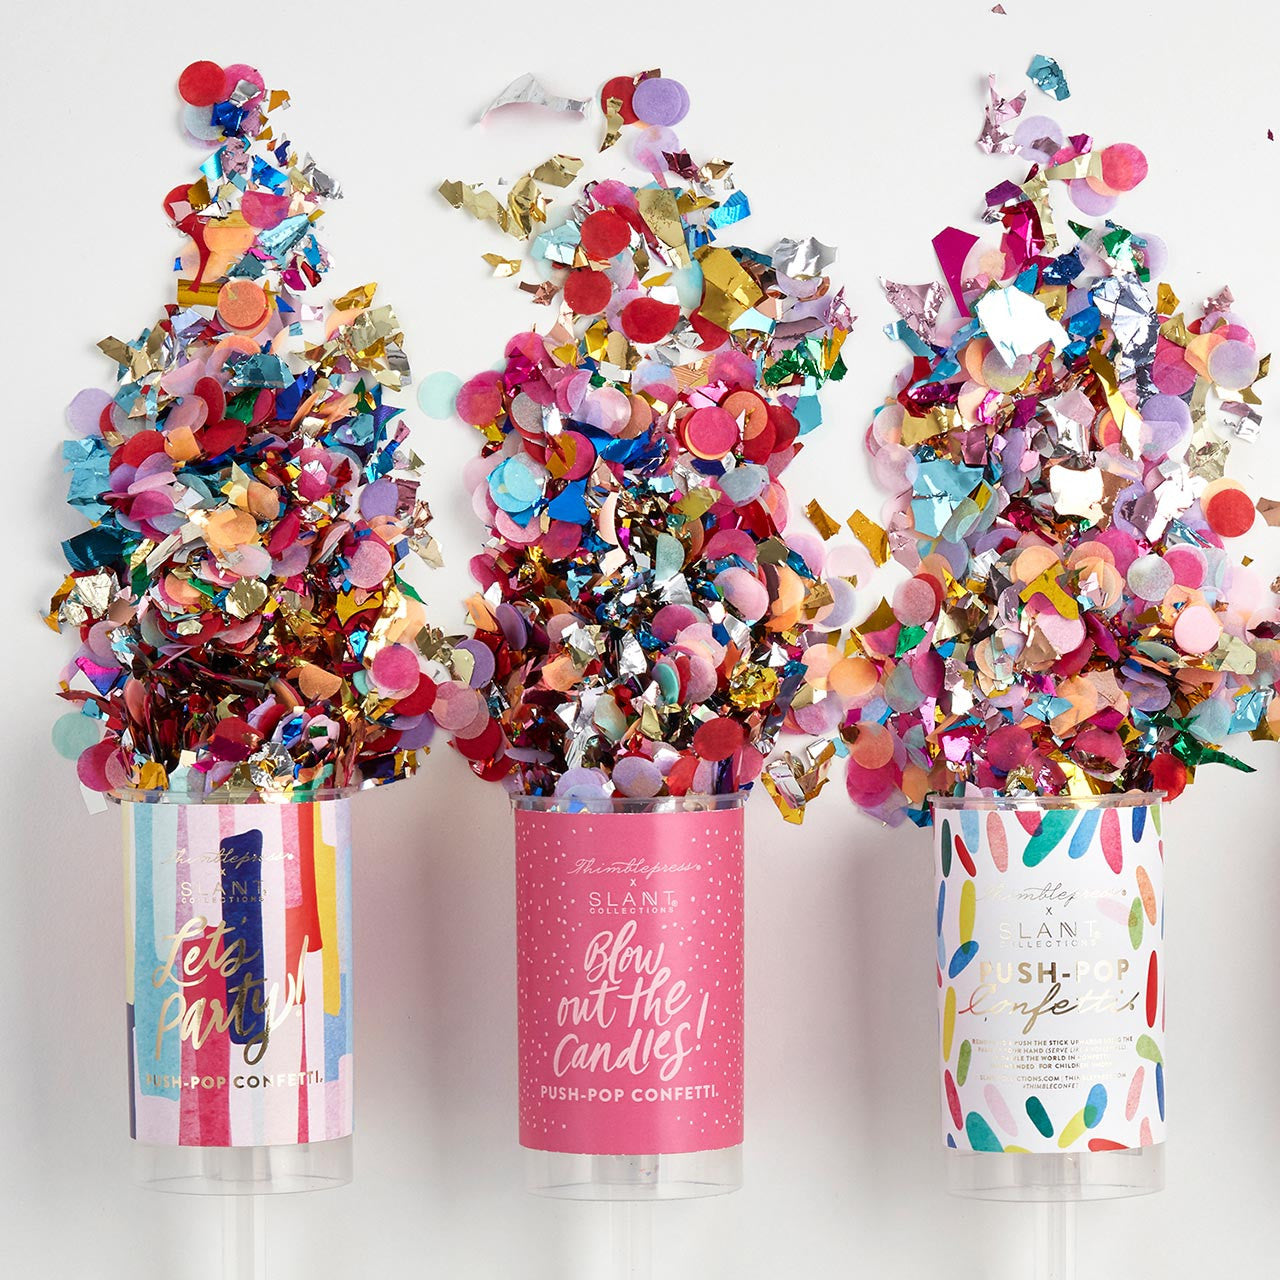 6 Pack of Confetti Party Poppers | Multicolor Push-pop Party Favor